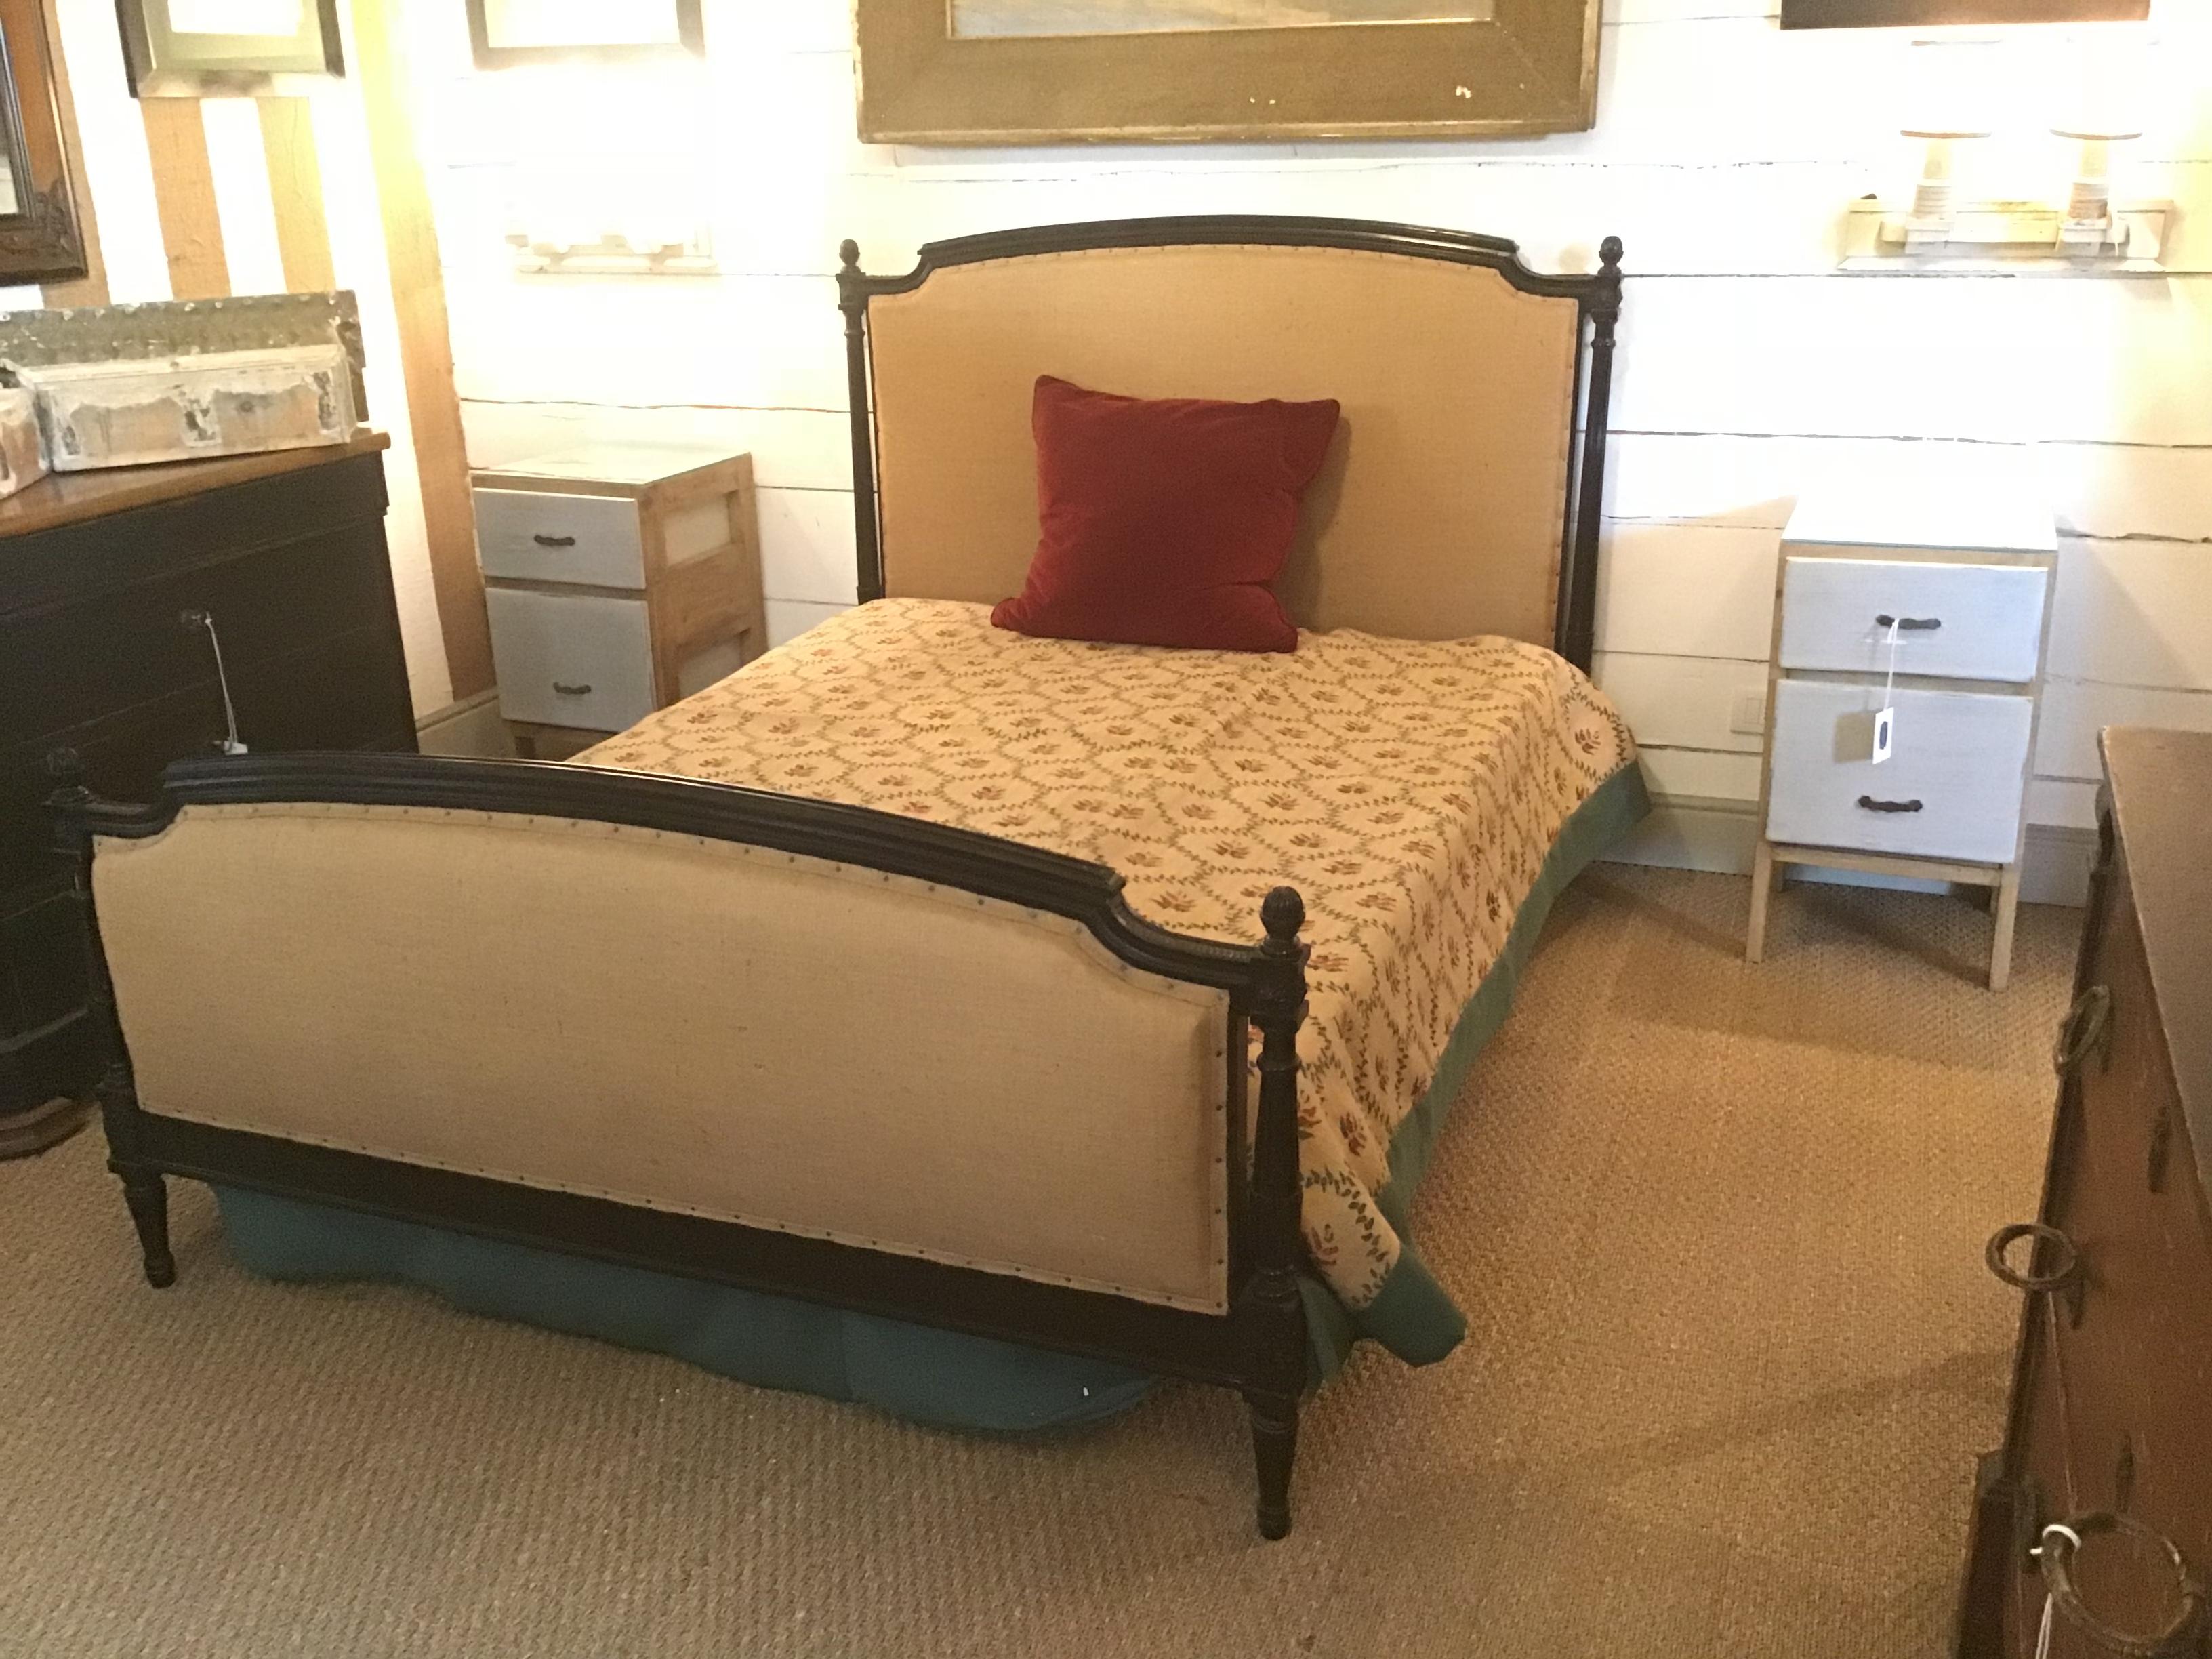 19th Century French Double Bed in Black Lacquered Wood and Jute from 1890s (Französisch)